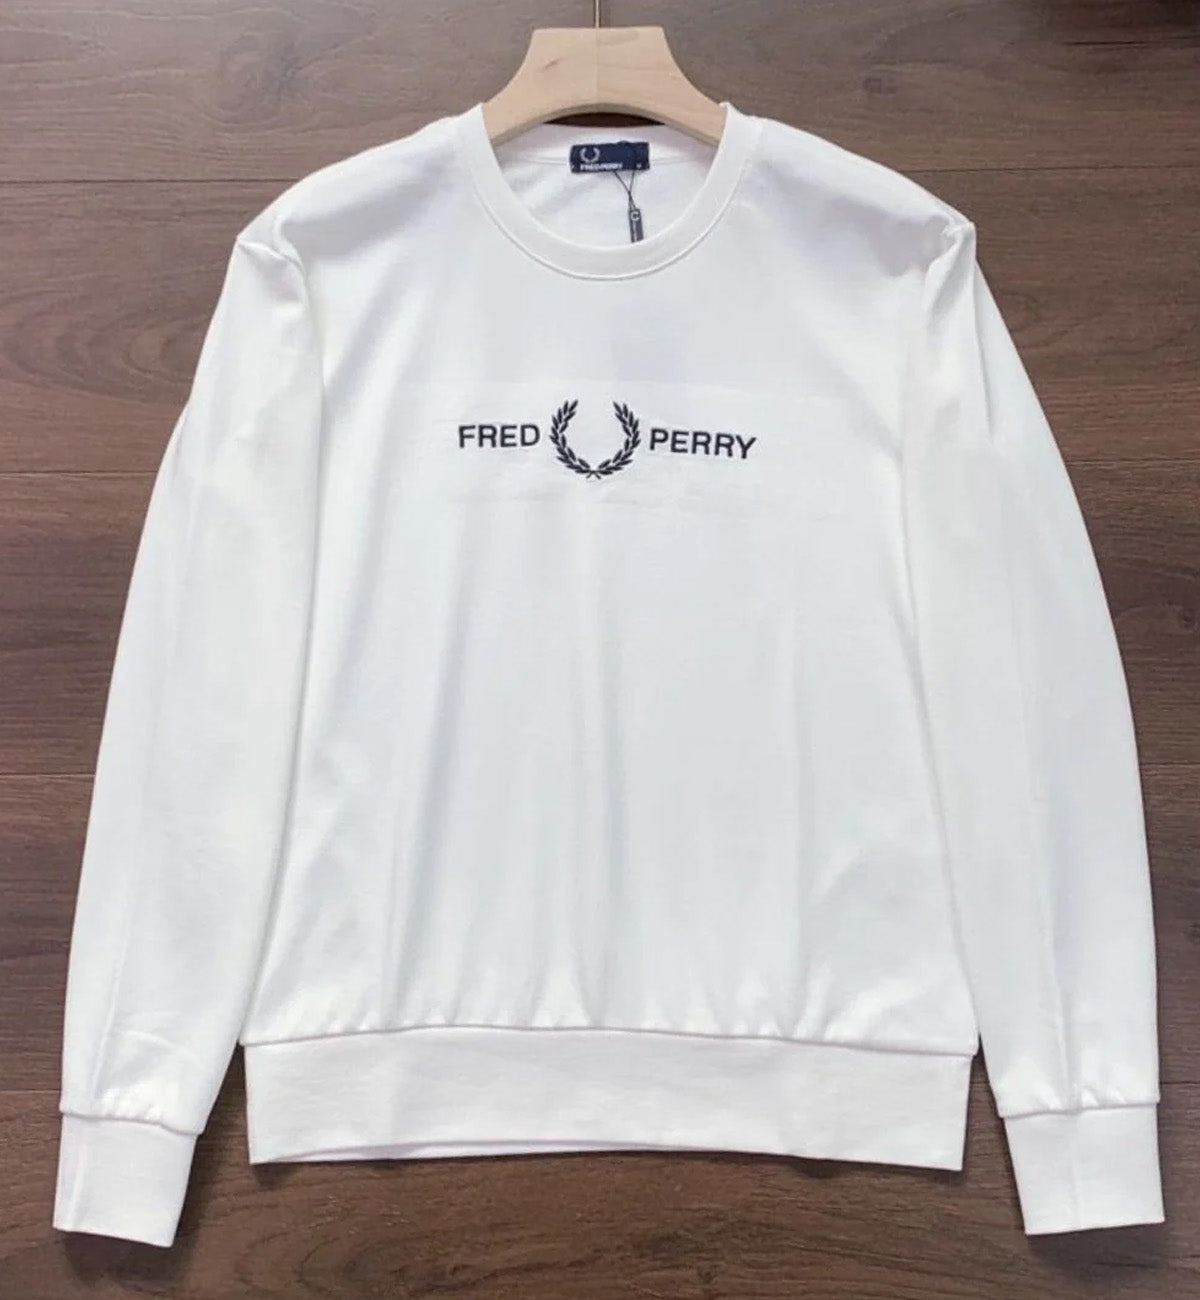 Fred Perry Graphic Sweatshirt (White) – The Factory KL